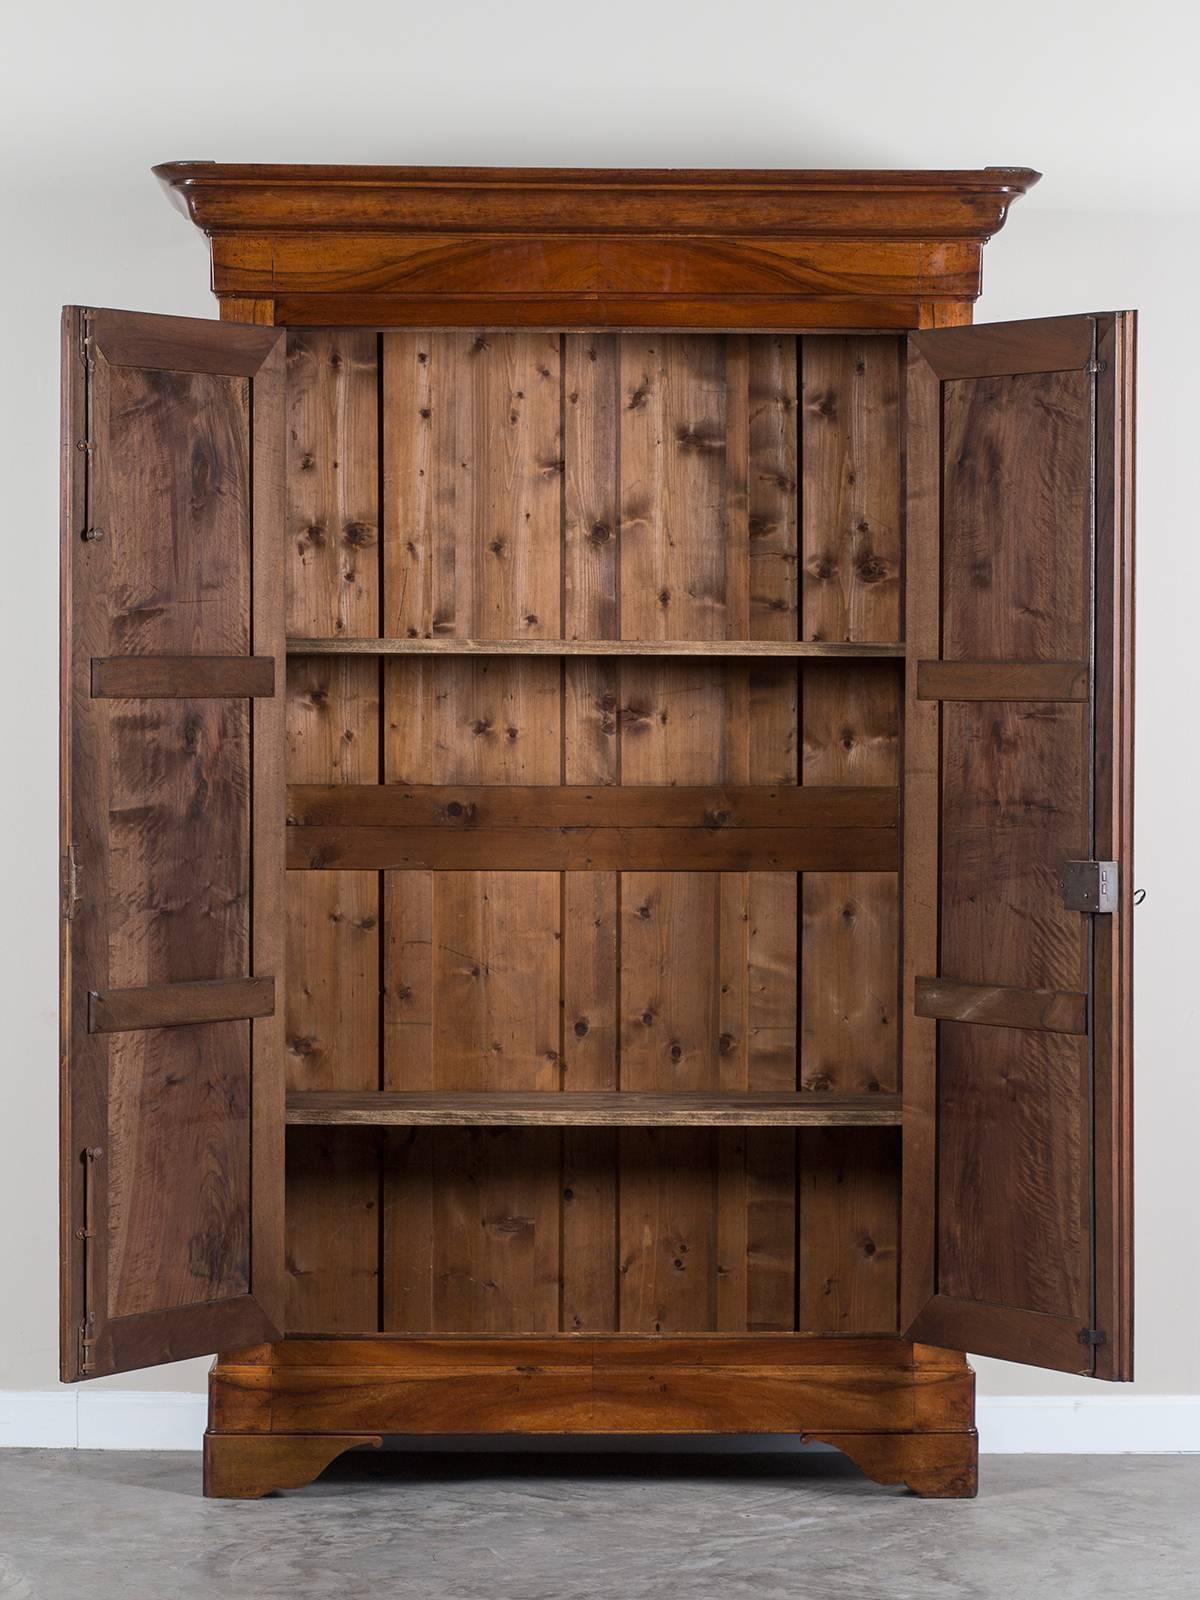 Receive our new selections direct from 1stdibs by email each week. Please click “Follow Dealer” button below and see them first!

The striking pattern of the matched walnut timber on this antique French Louis Philippe armoire emphasizes the simple